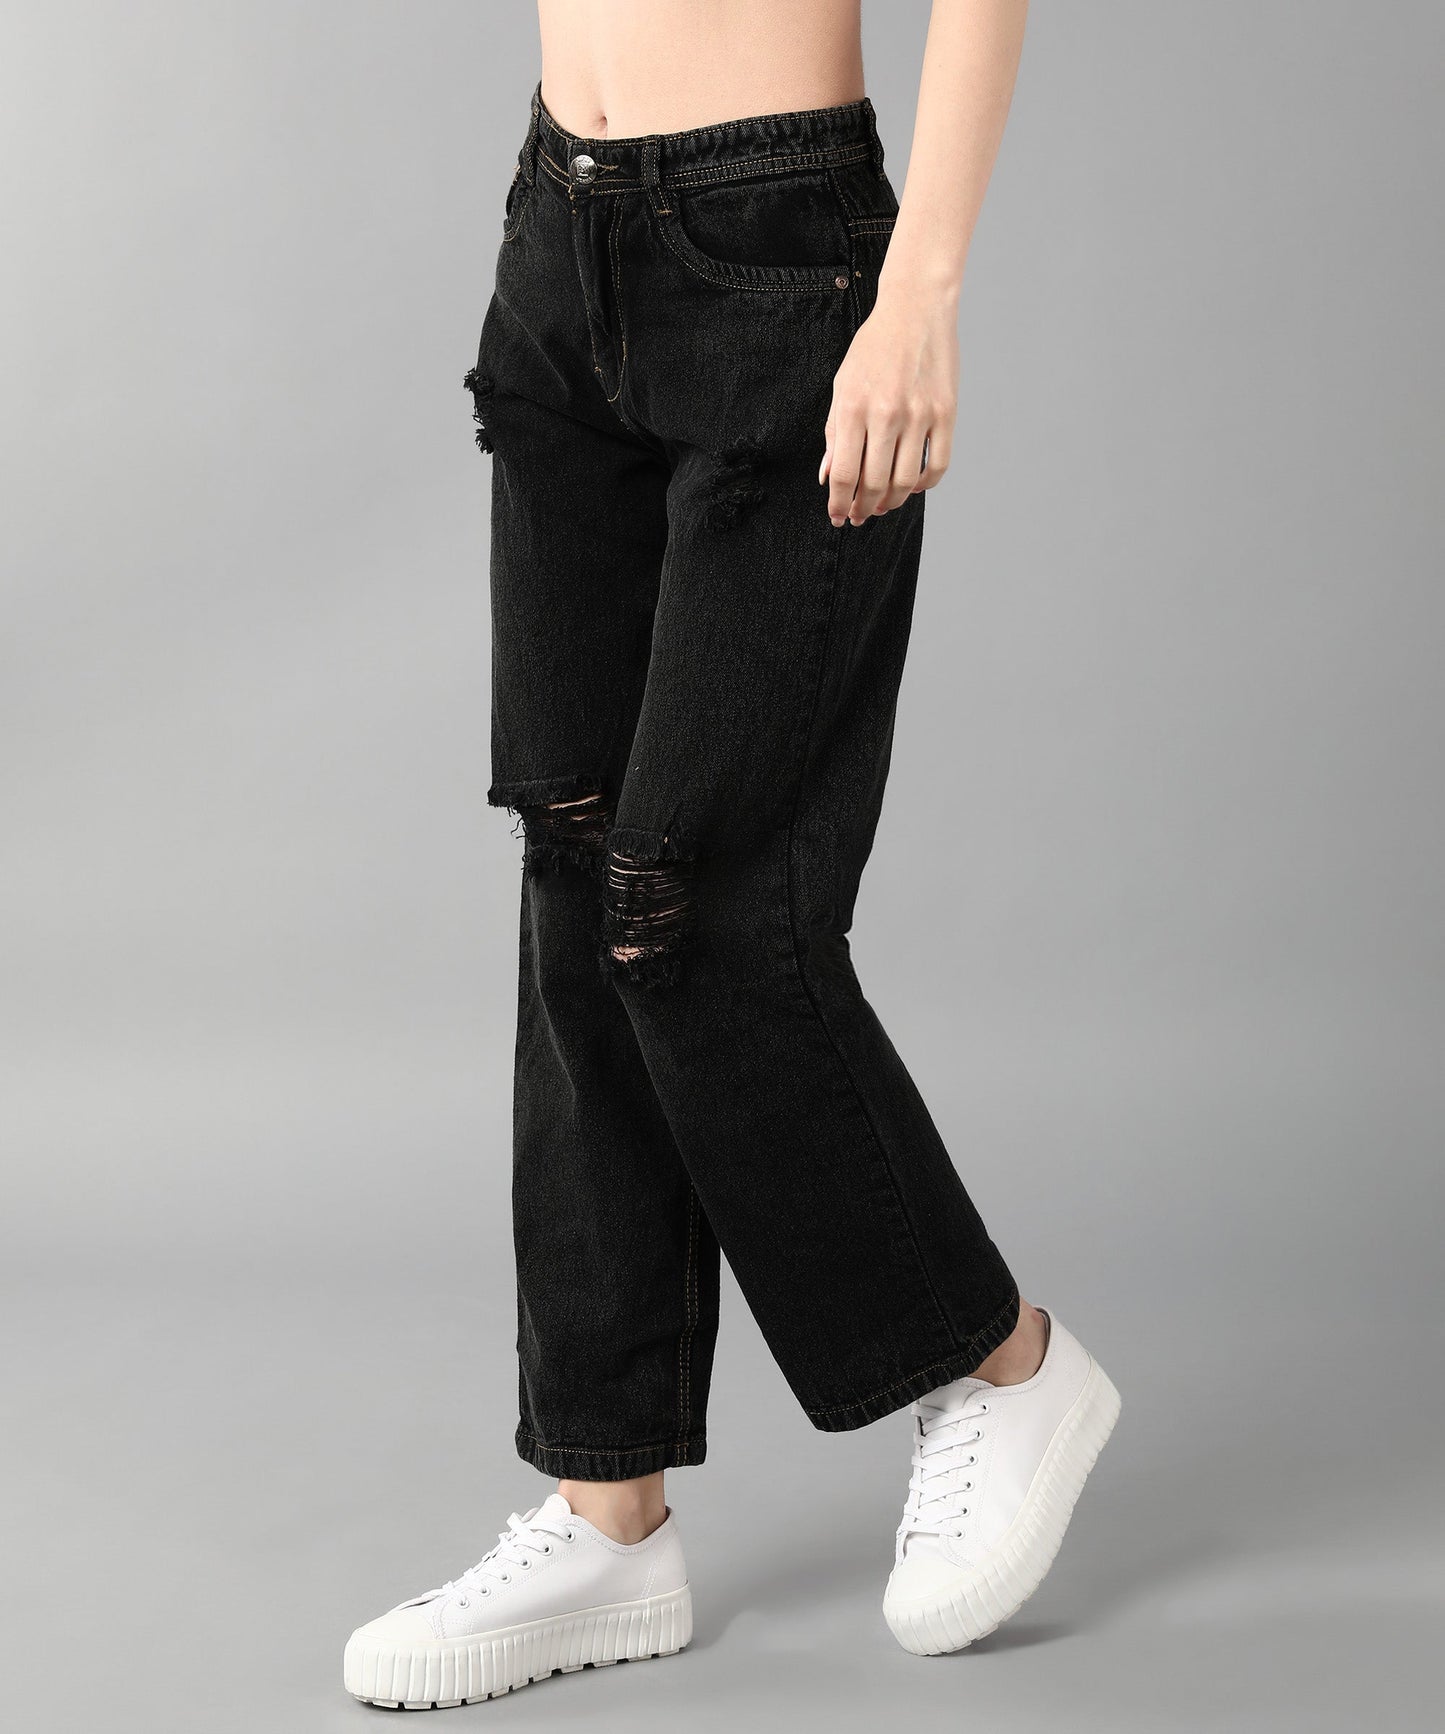 Relaxed Fit Distressed Black Jeans - NiftyJeans